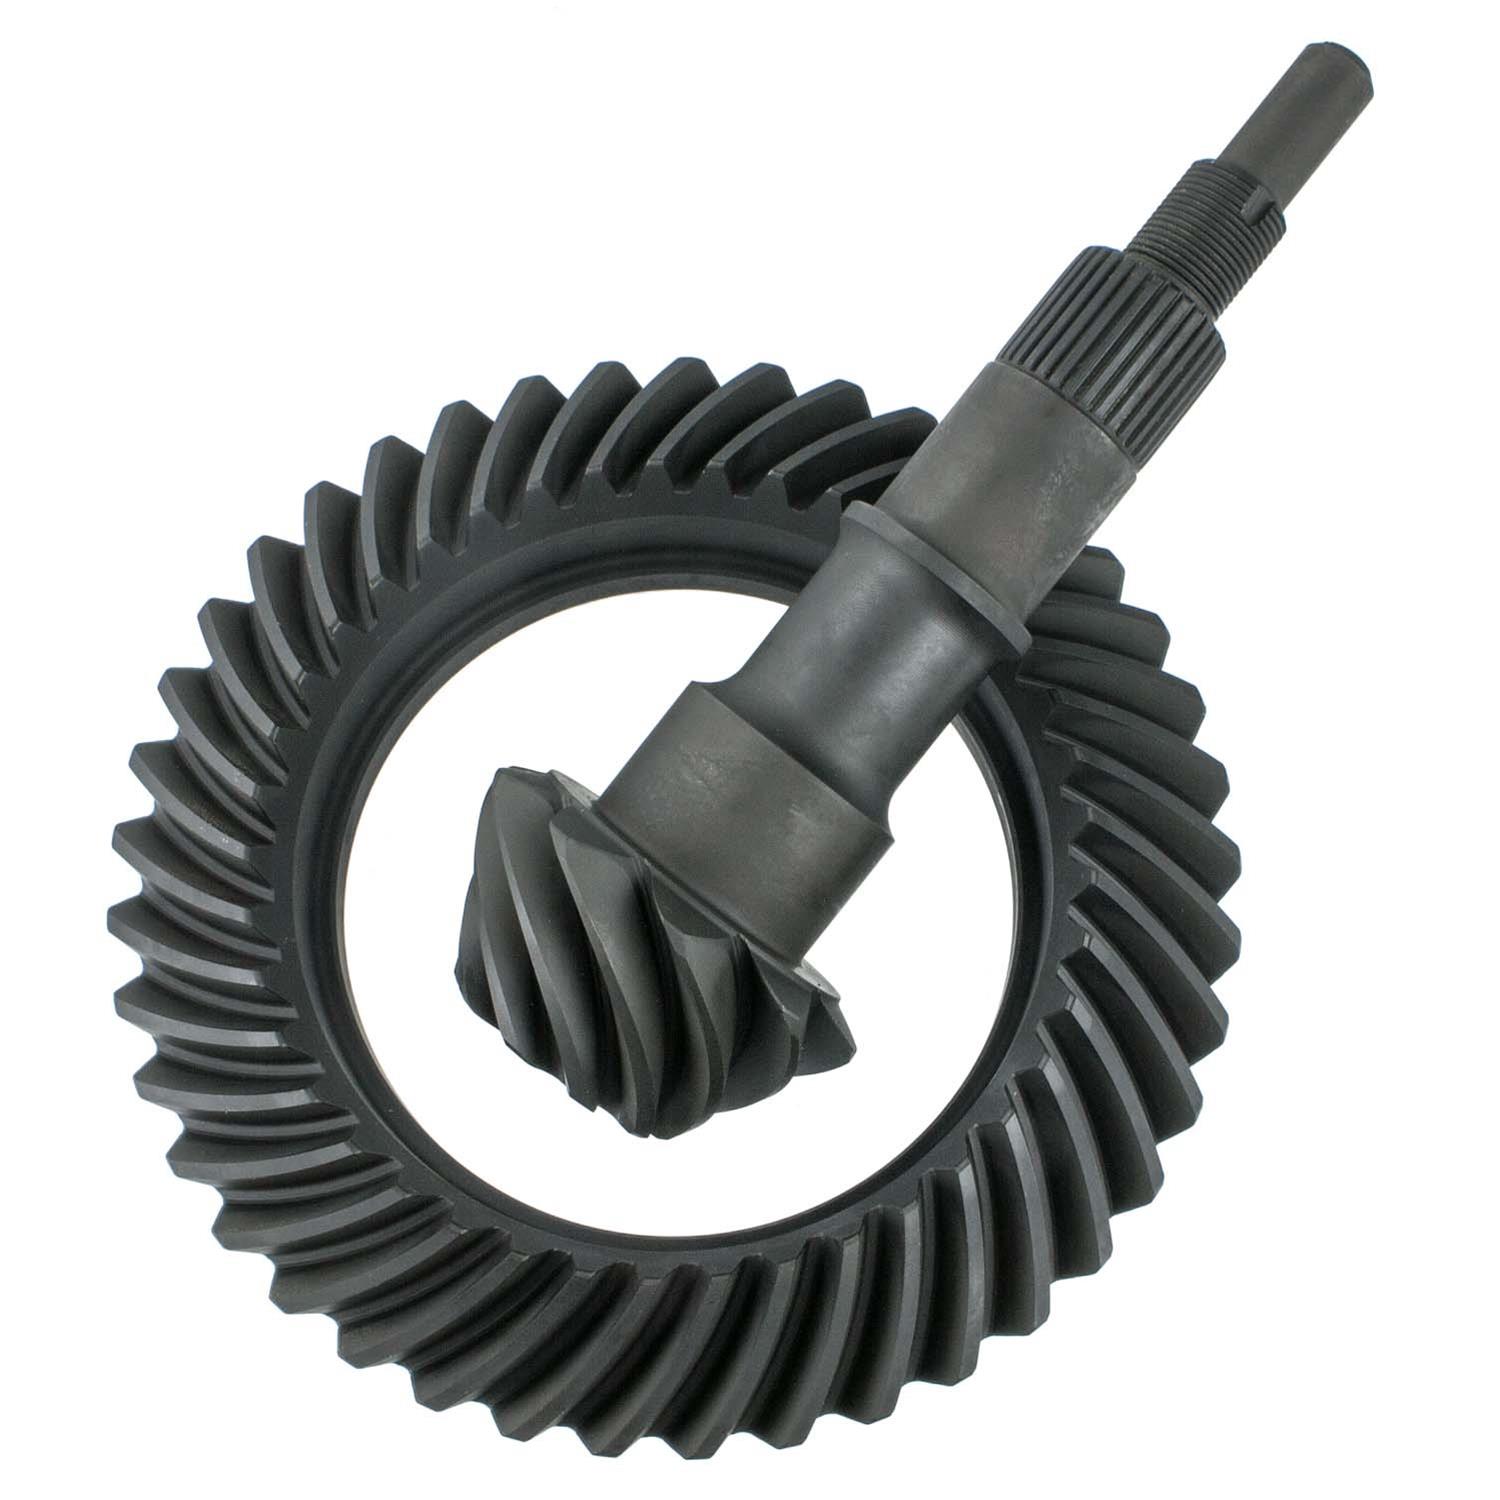 2010-2015 Camaro Motive Gear 4.10 Ring and Pinion Set - For 8.6"